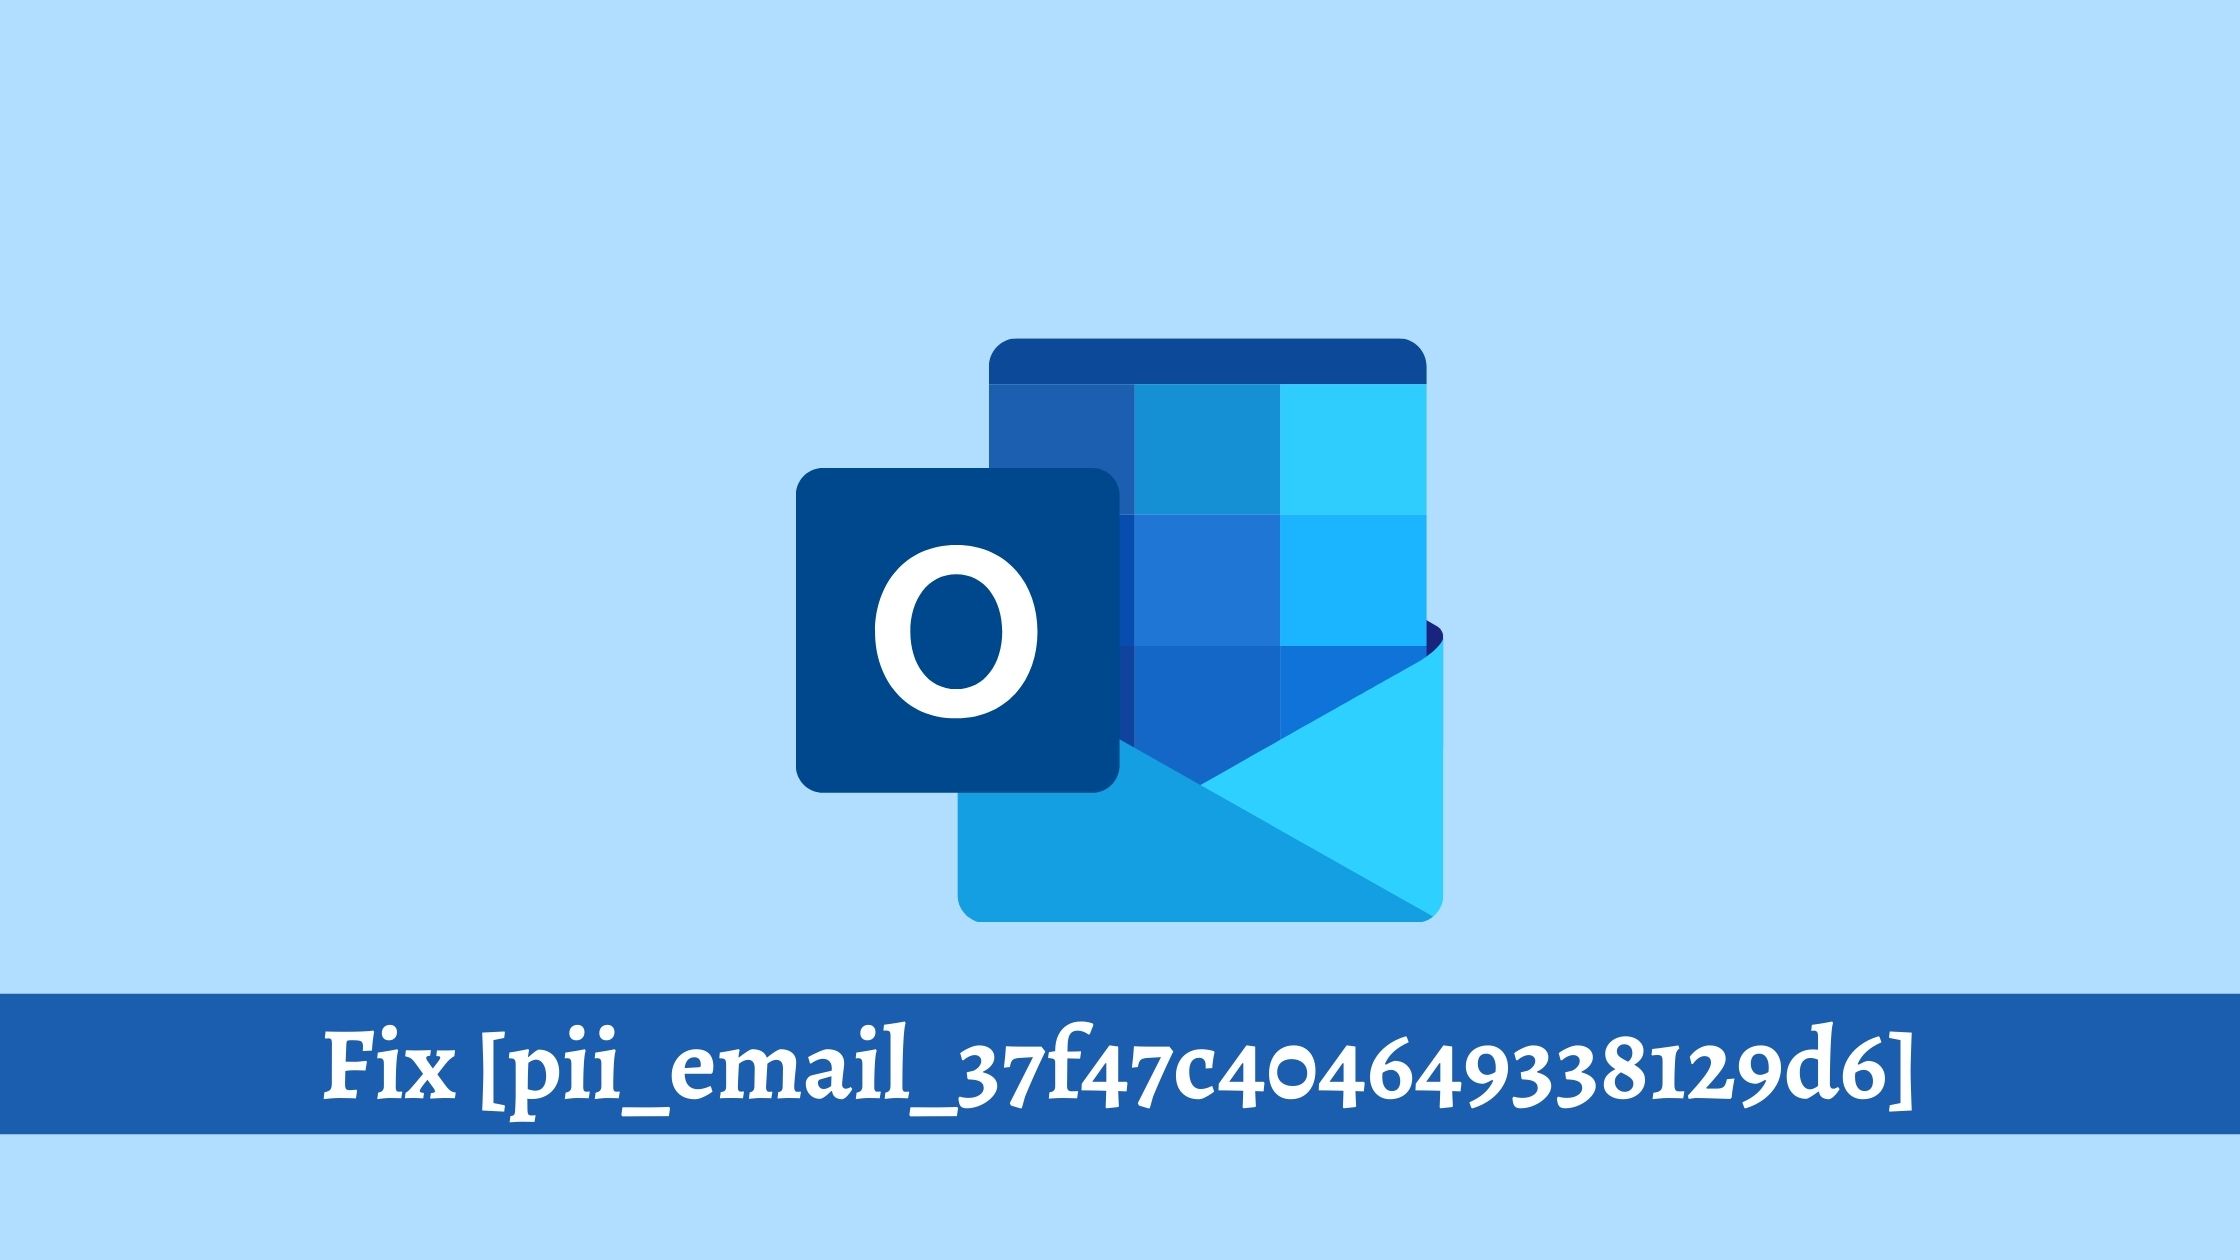 How to solve pii error code [pii_email_37f47c404649338129d6]